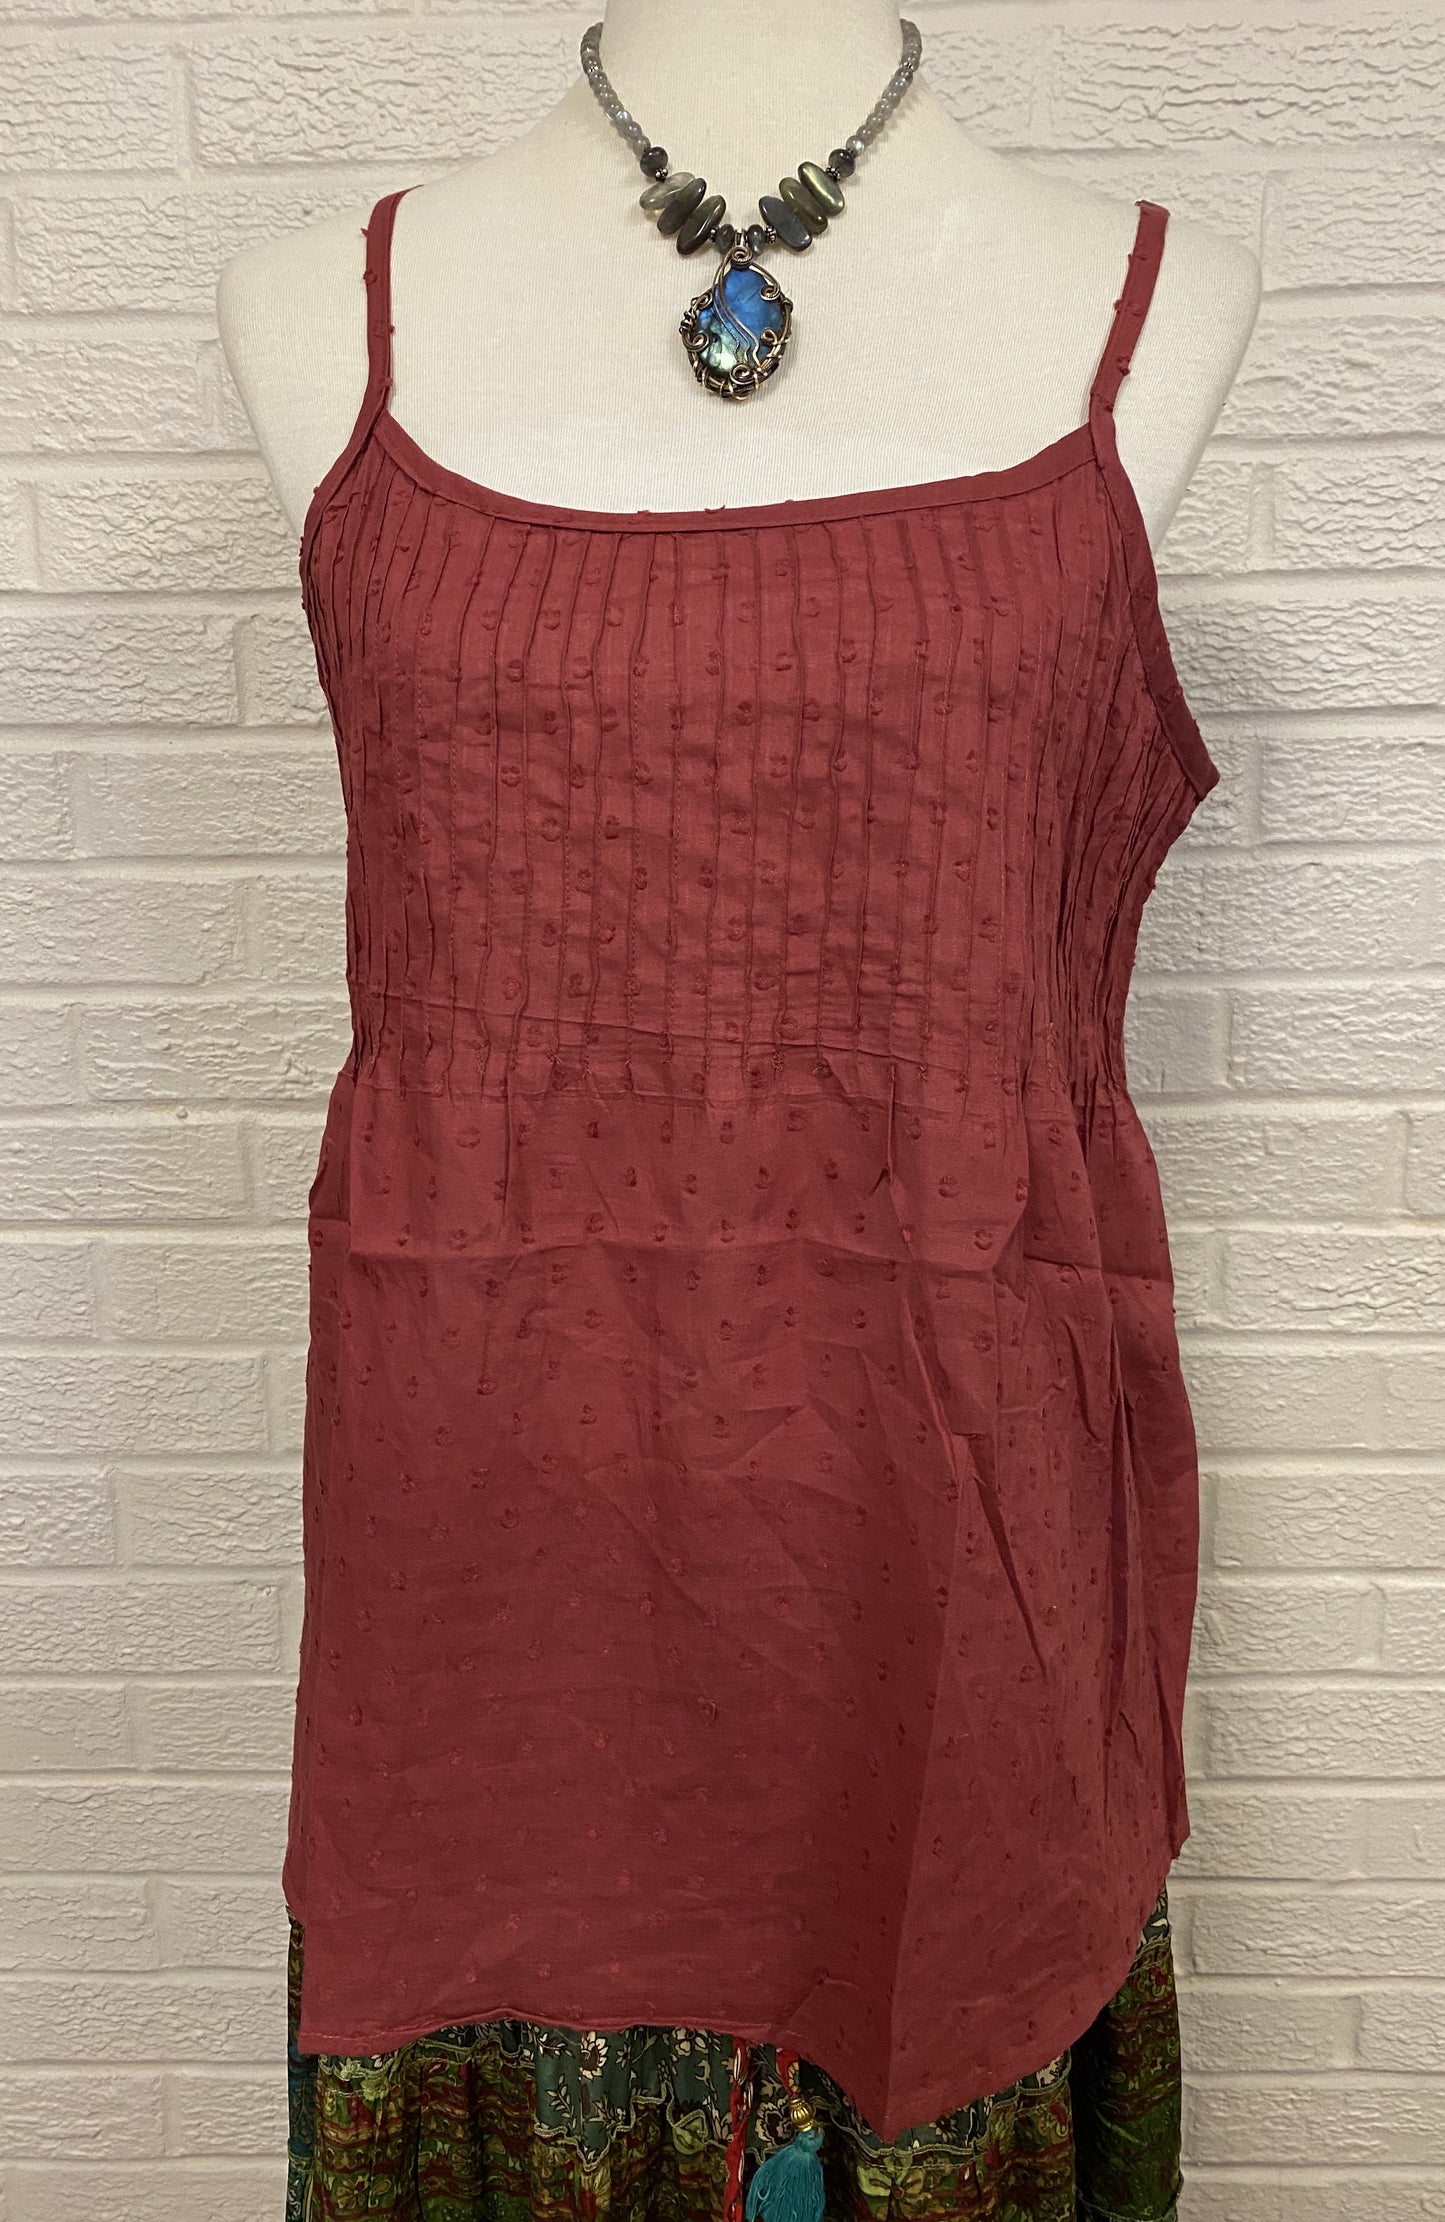 Cotton Tank Top with pleated detail on top - 4 Colors Available